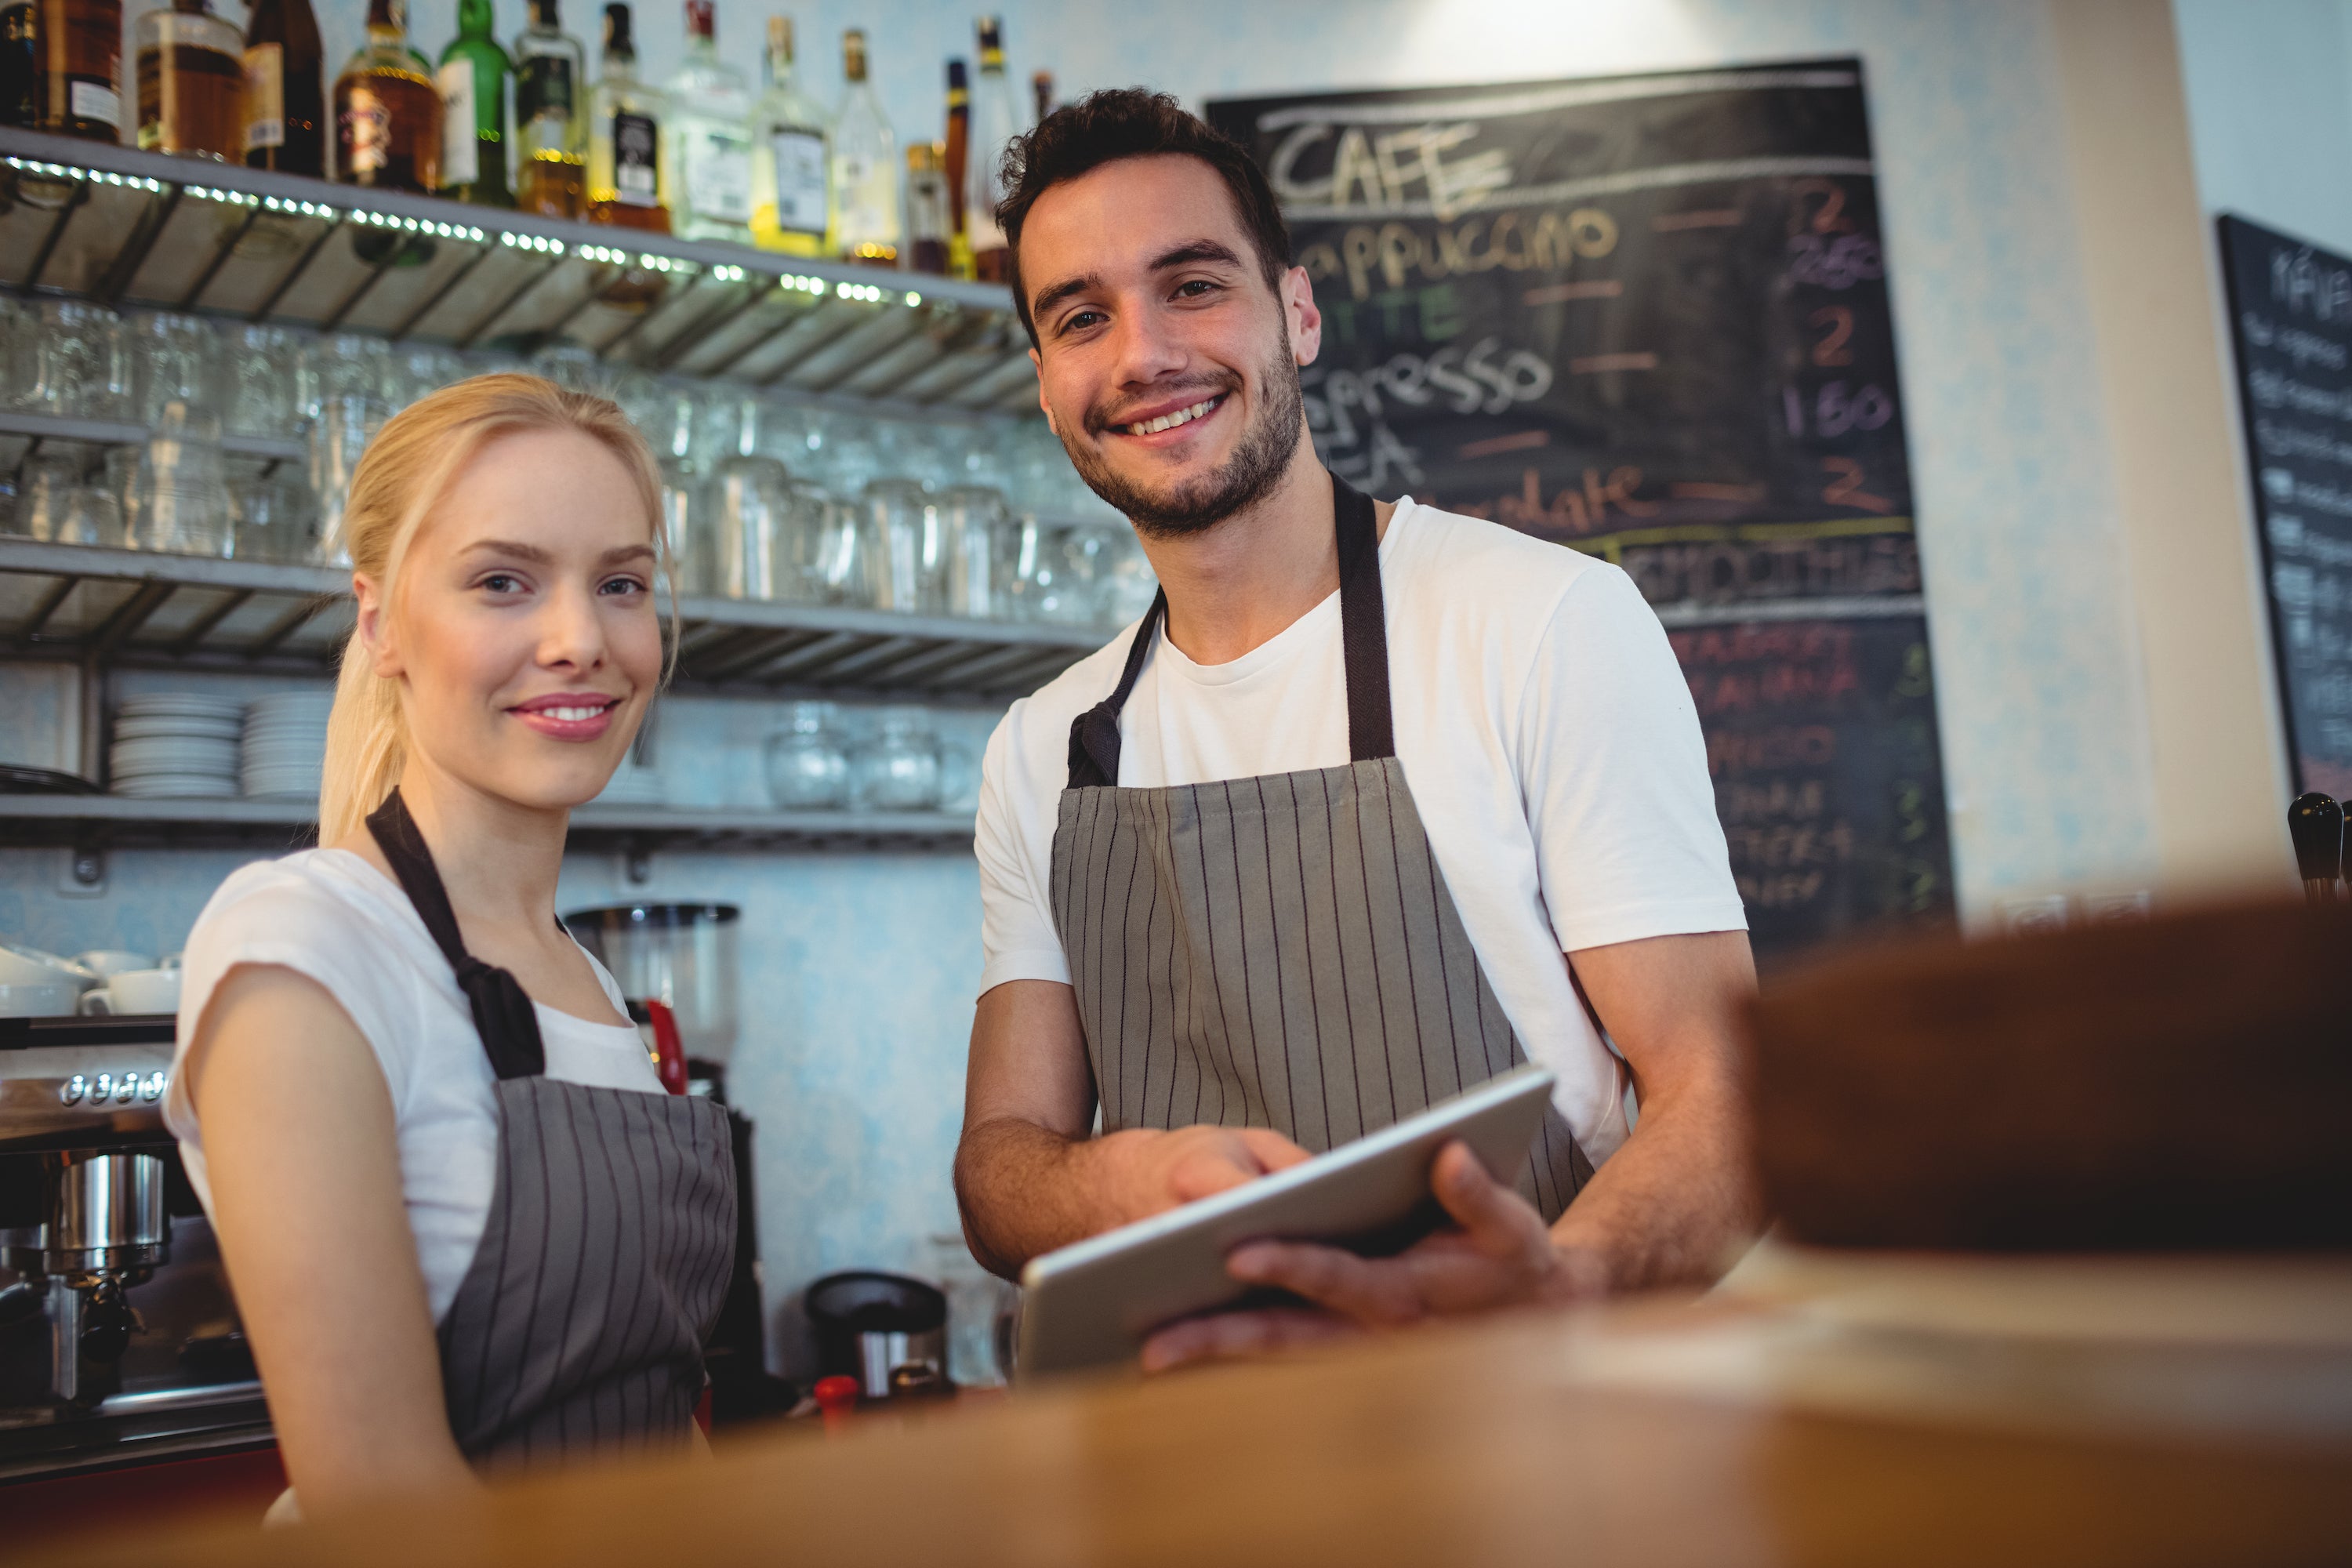 Employees, One Simple Way You Can Attract Younger Customers to Your Business